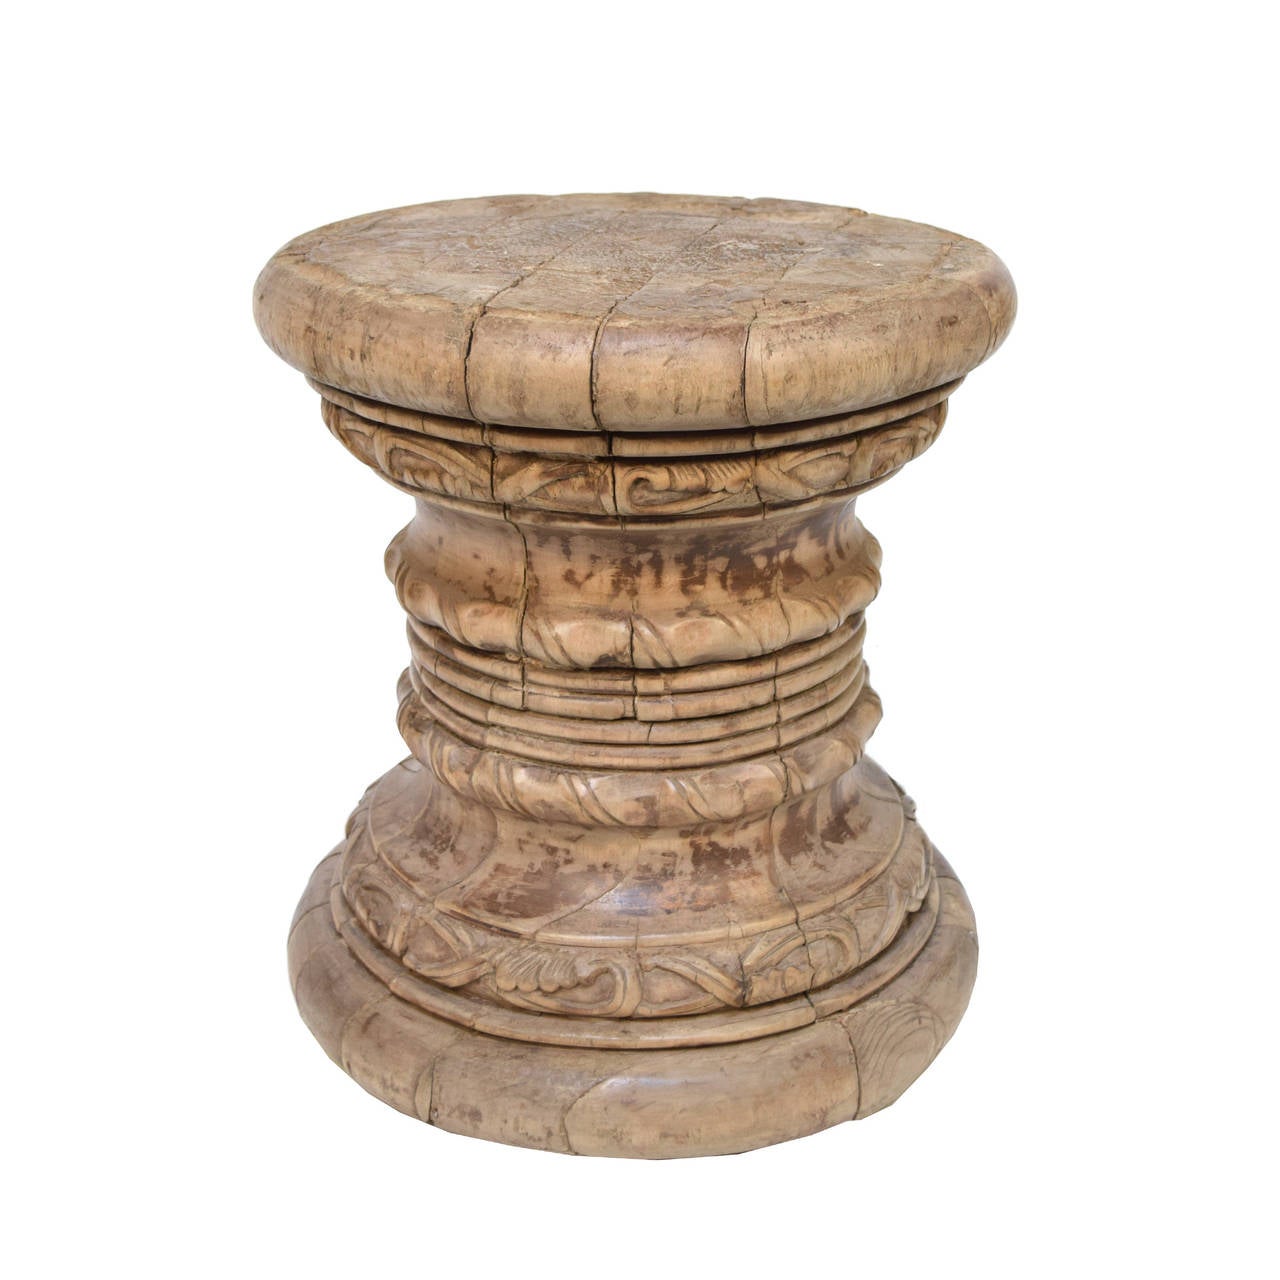 A c. 1800 carved spirit stand from Northern China made of Chinese Northern Elm.